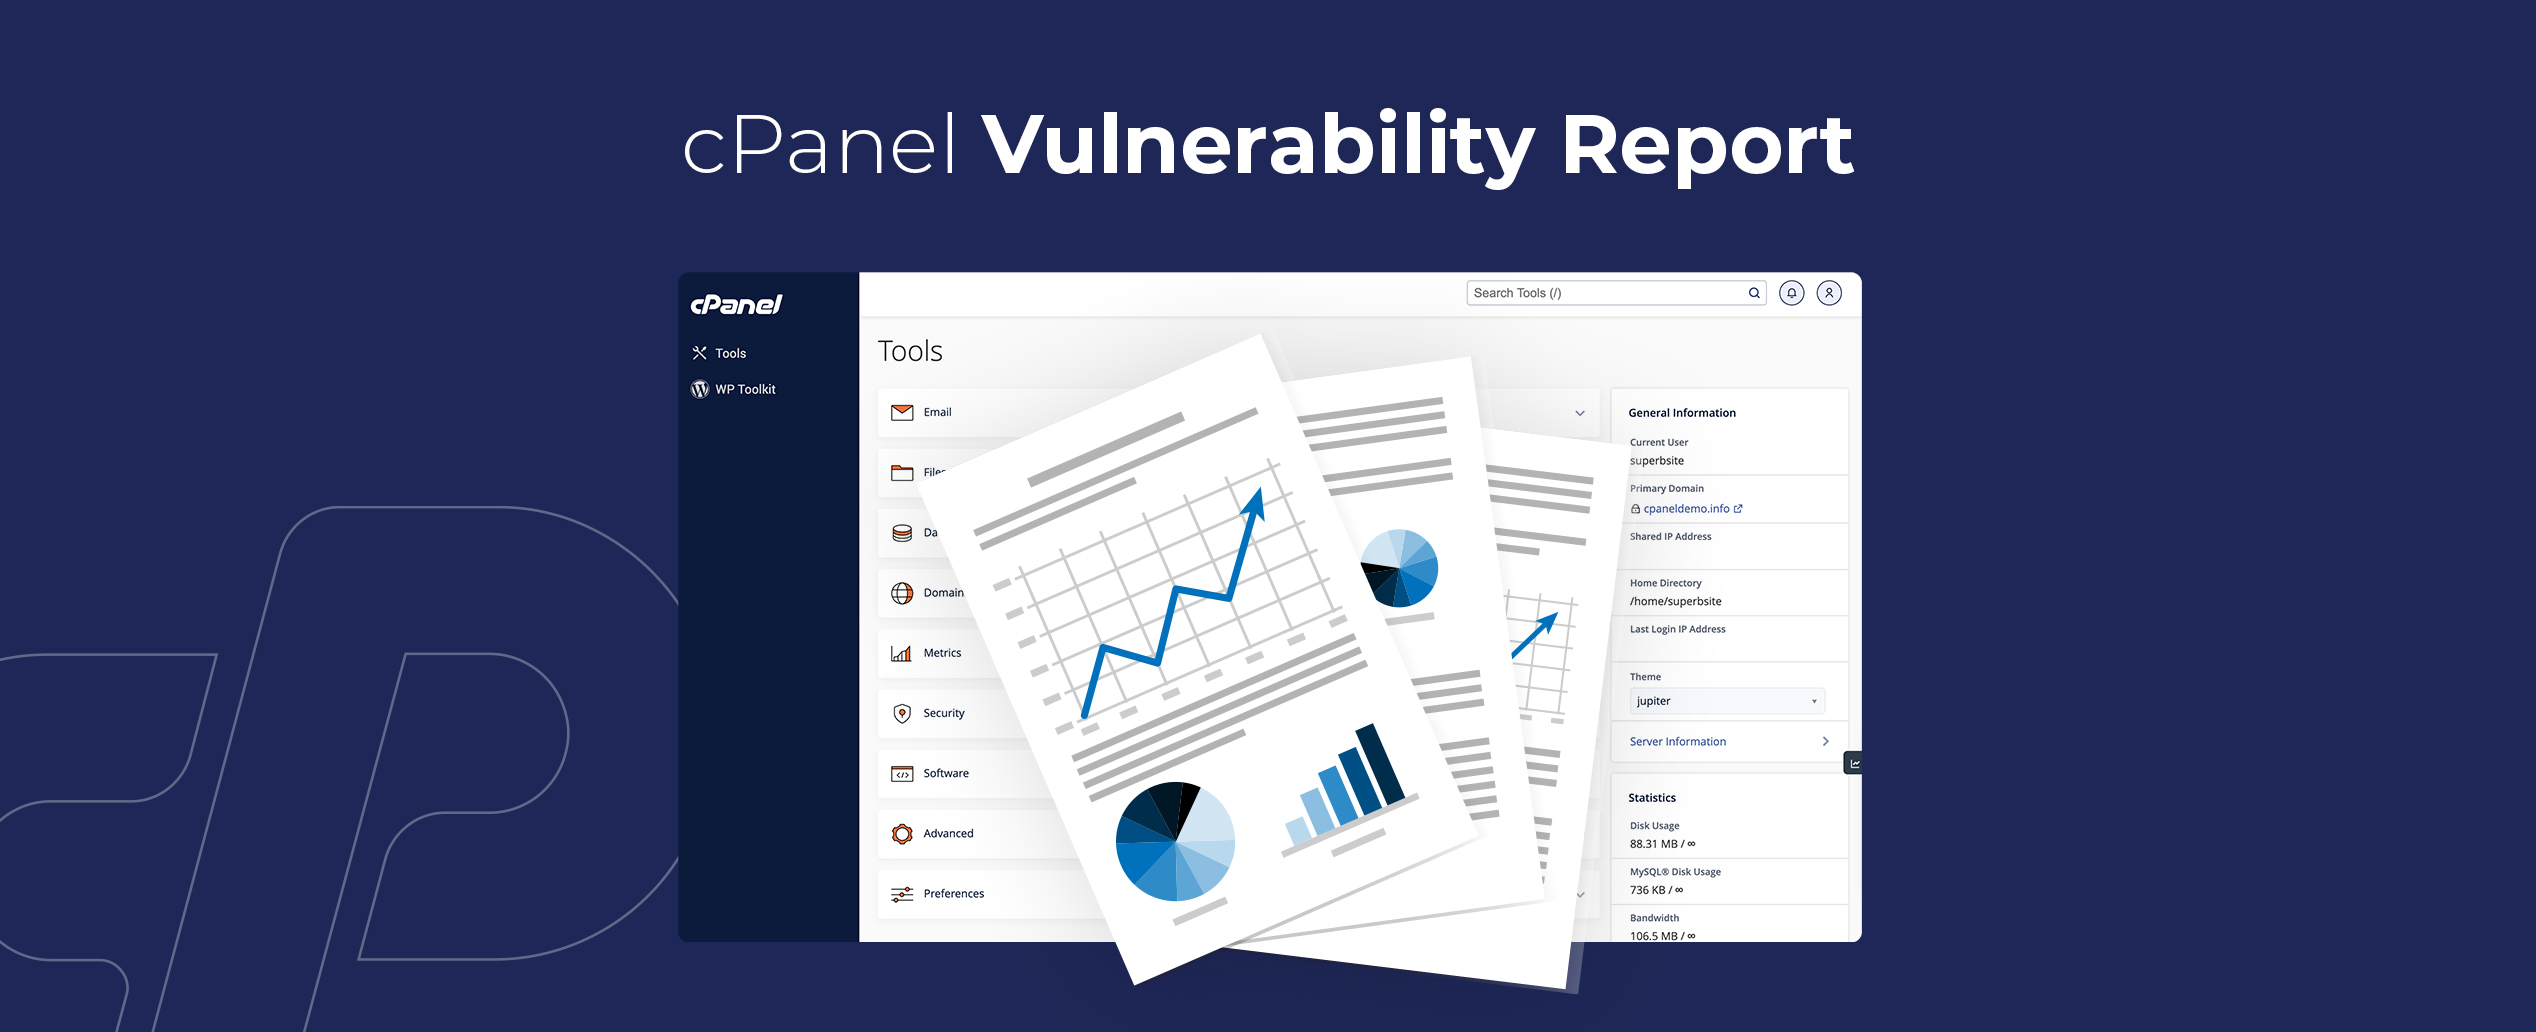 cPanel Vulnerability Report: No Actions Required by Default